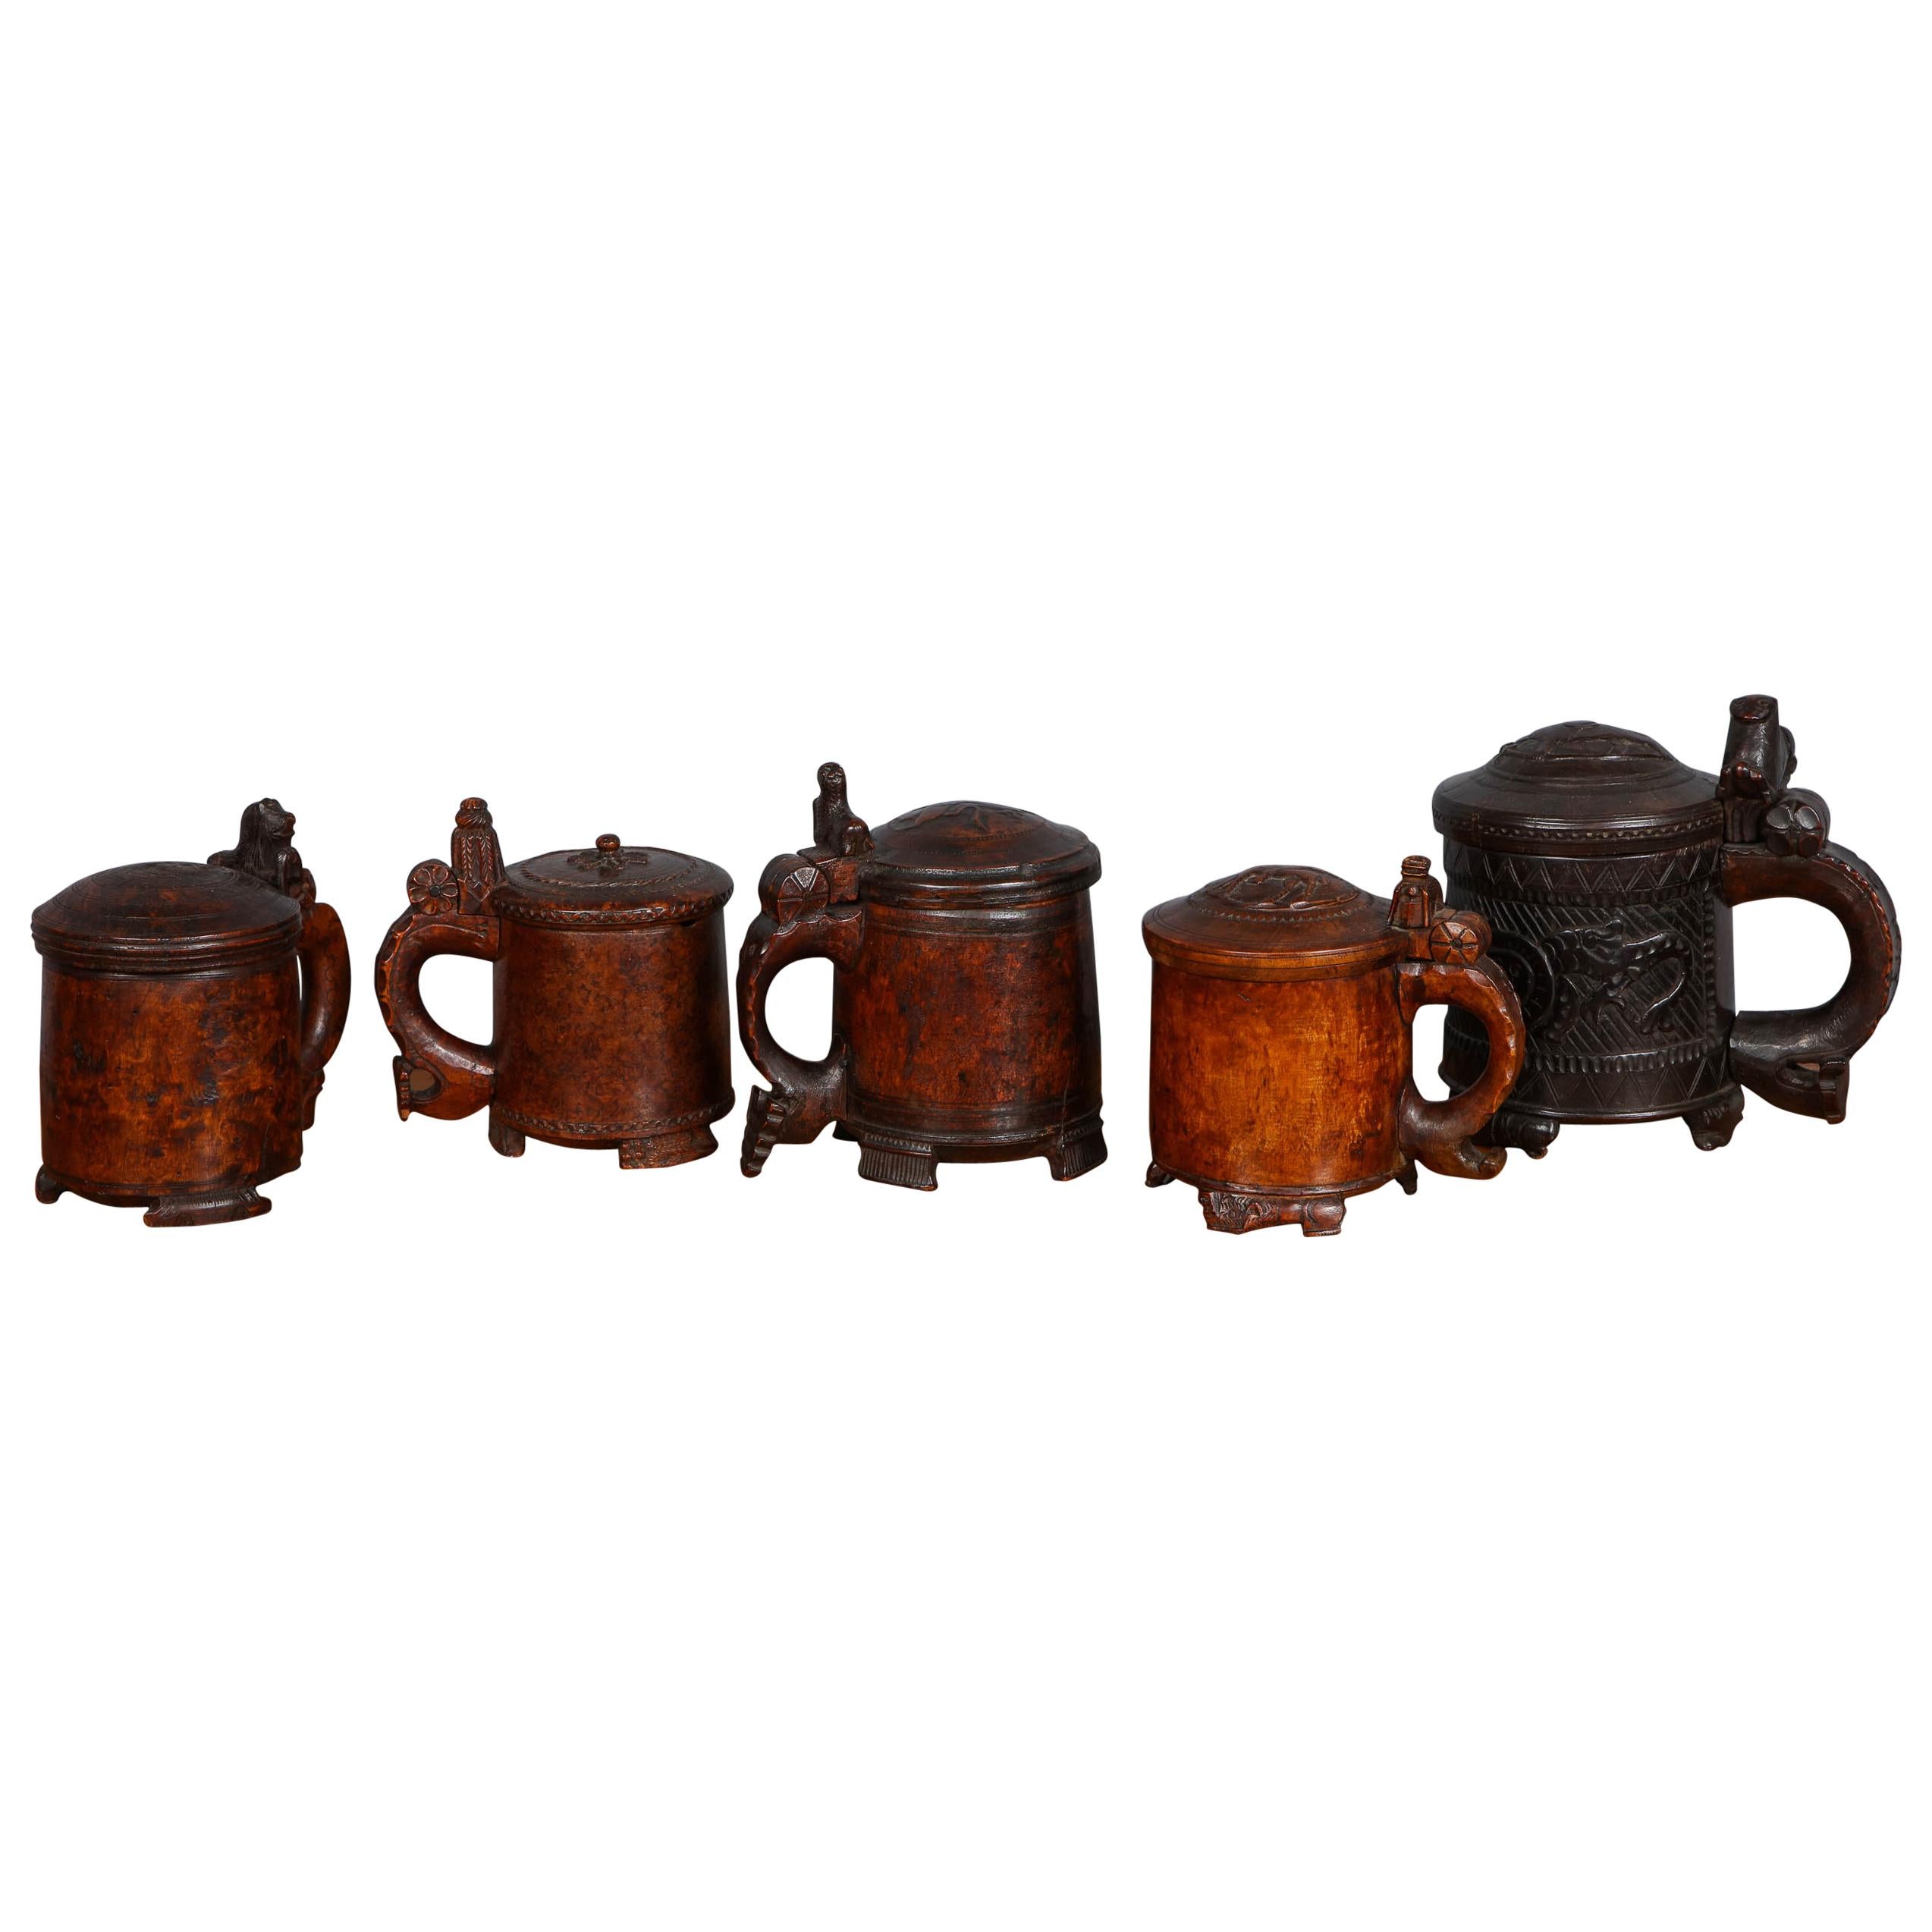 Collection of Norwegian Peg Tankards